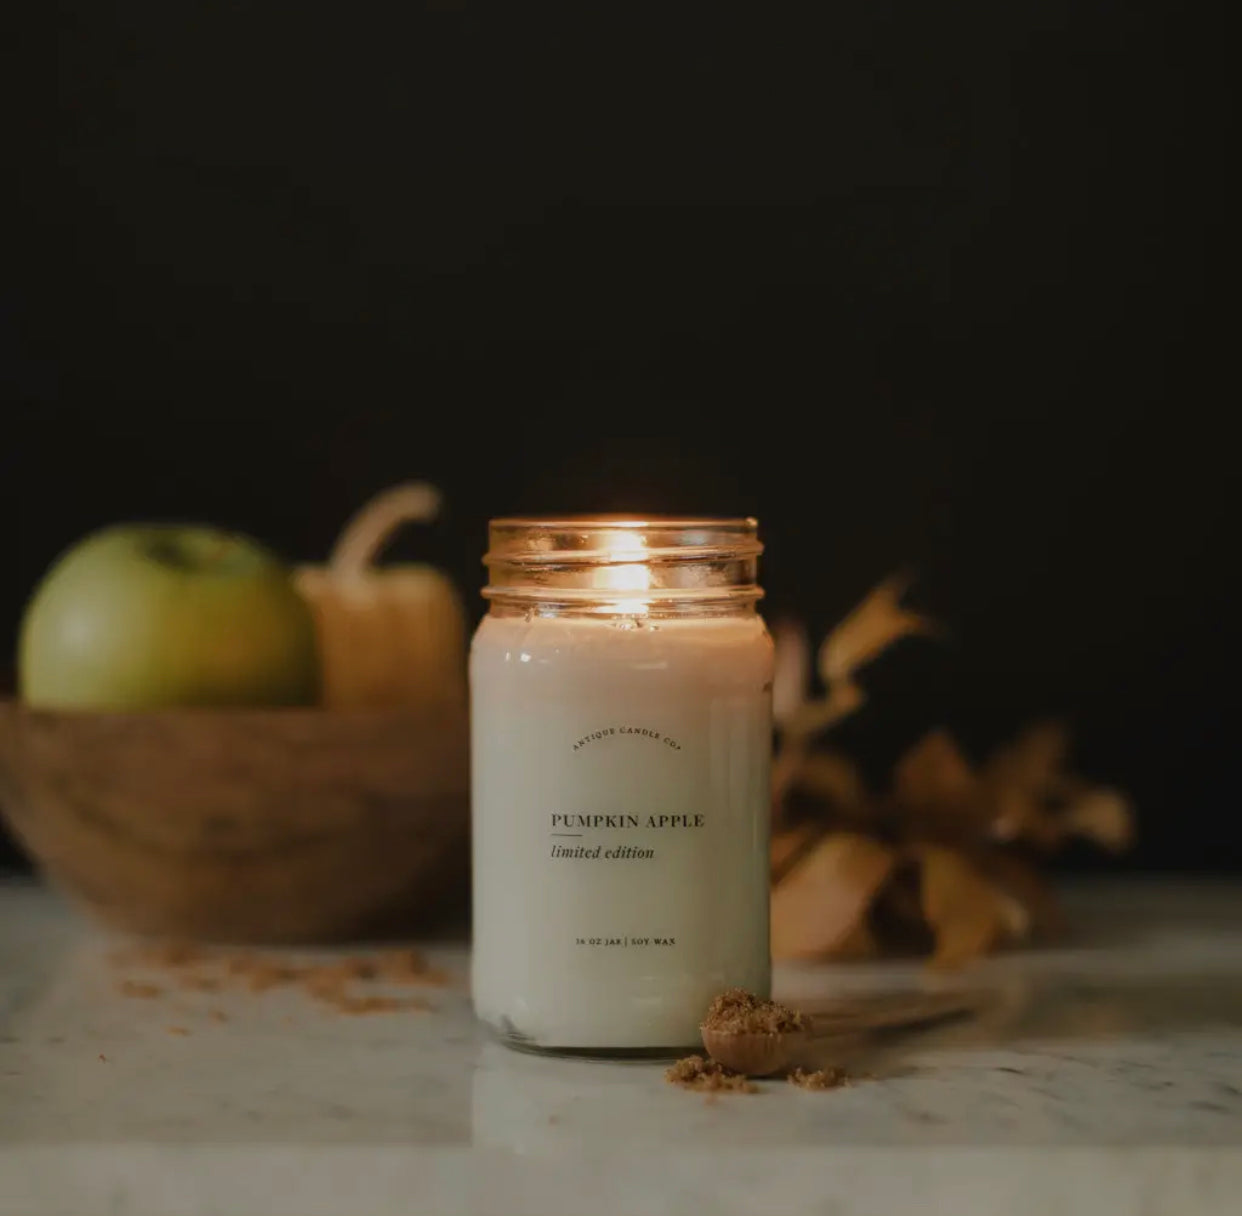 Pumpkin Apple Antique Candle Co., Limited Edition